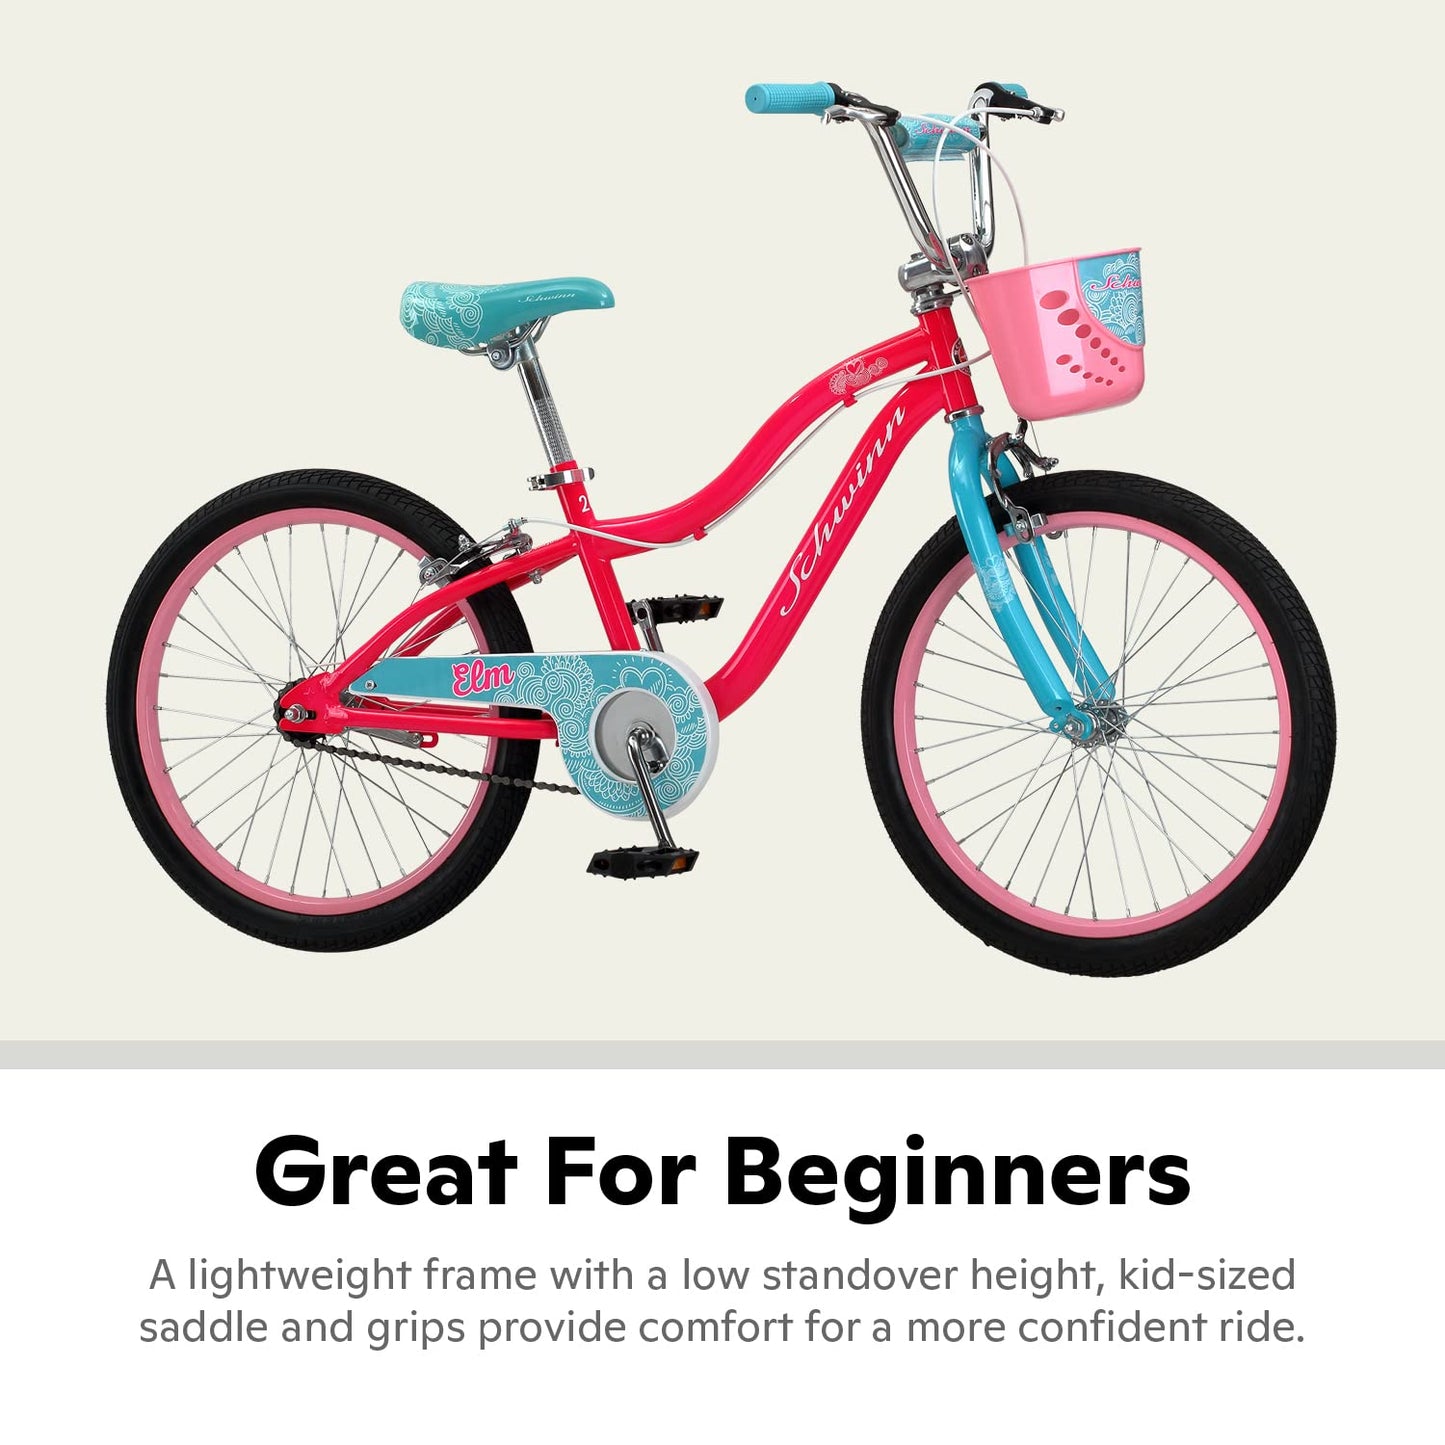 Schwinn Koen & Elm Toddler and Kids Bike, For Girls and Boys, 20-Inch Wheels, BMX Style, Kickstand Included, Chain Guard and Front Basket, Pink